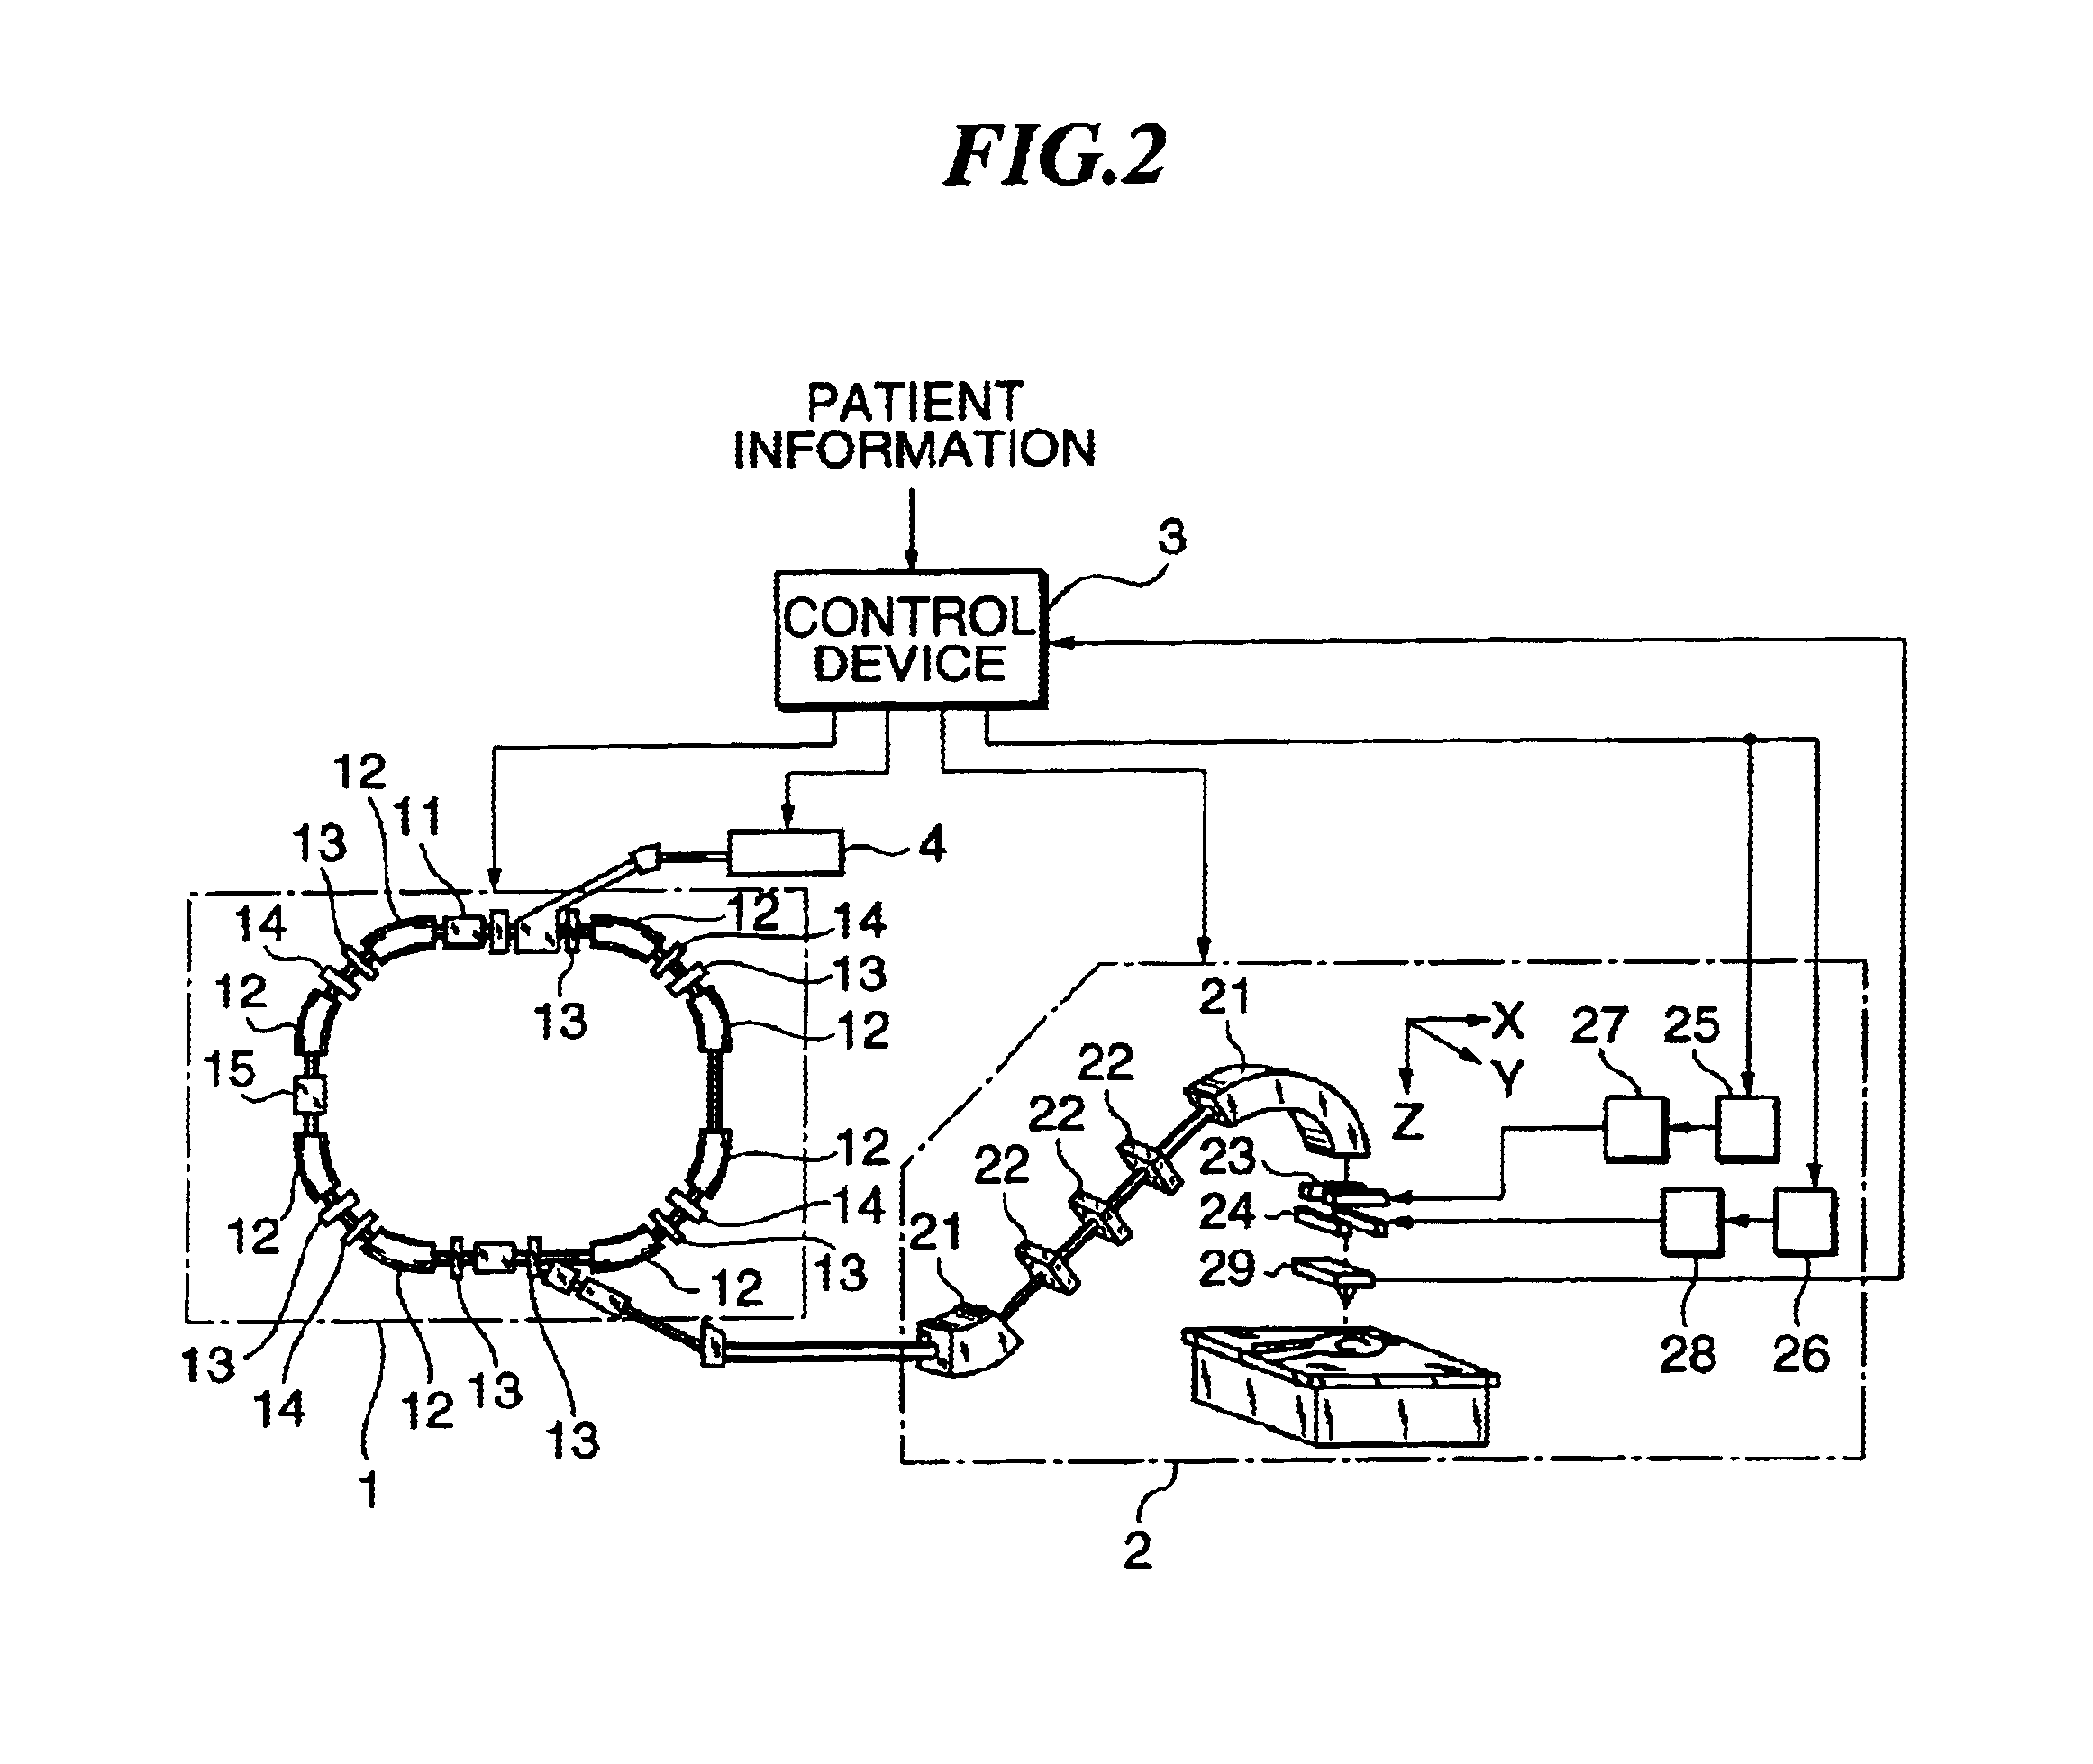 Charged particle beam irradiation equipment having scanning electromagnet power supplies